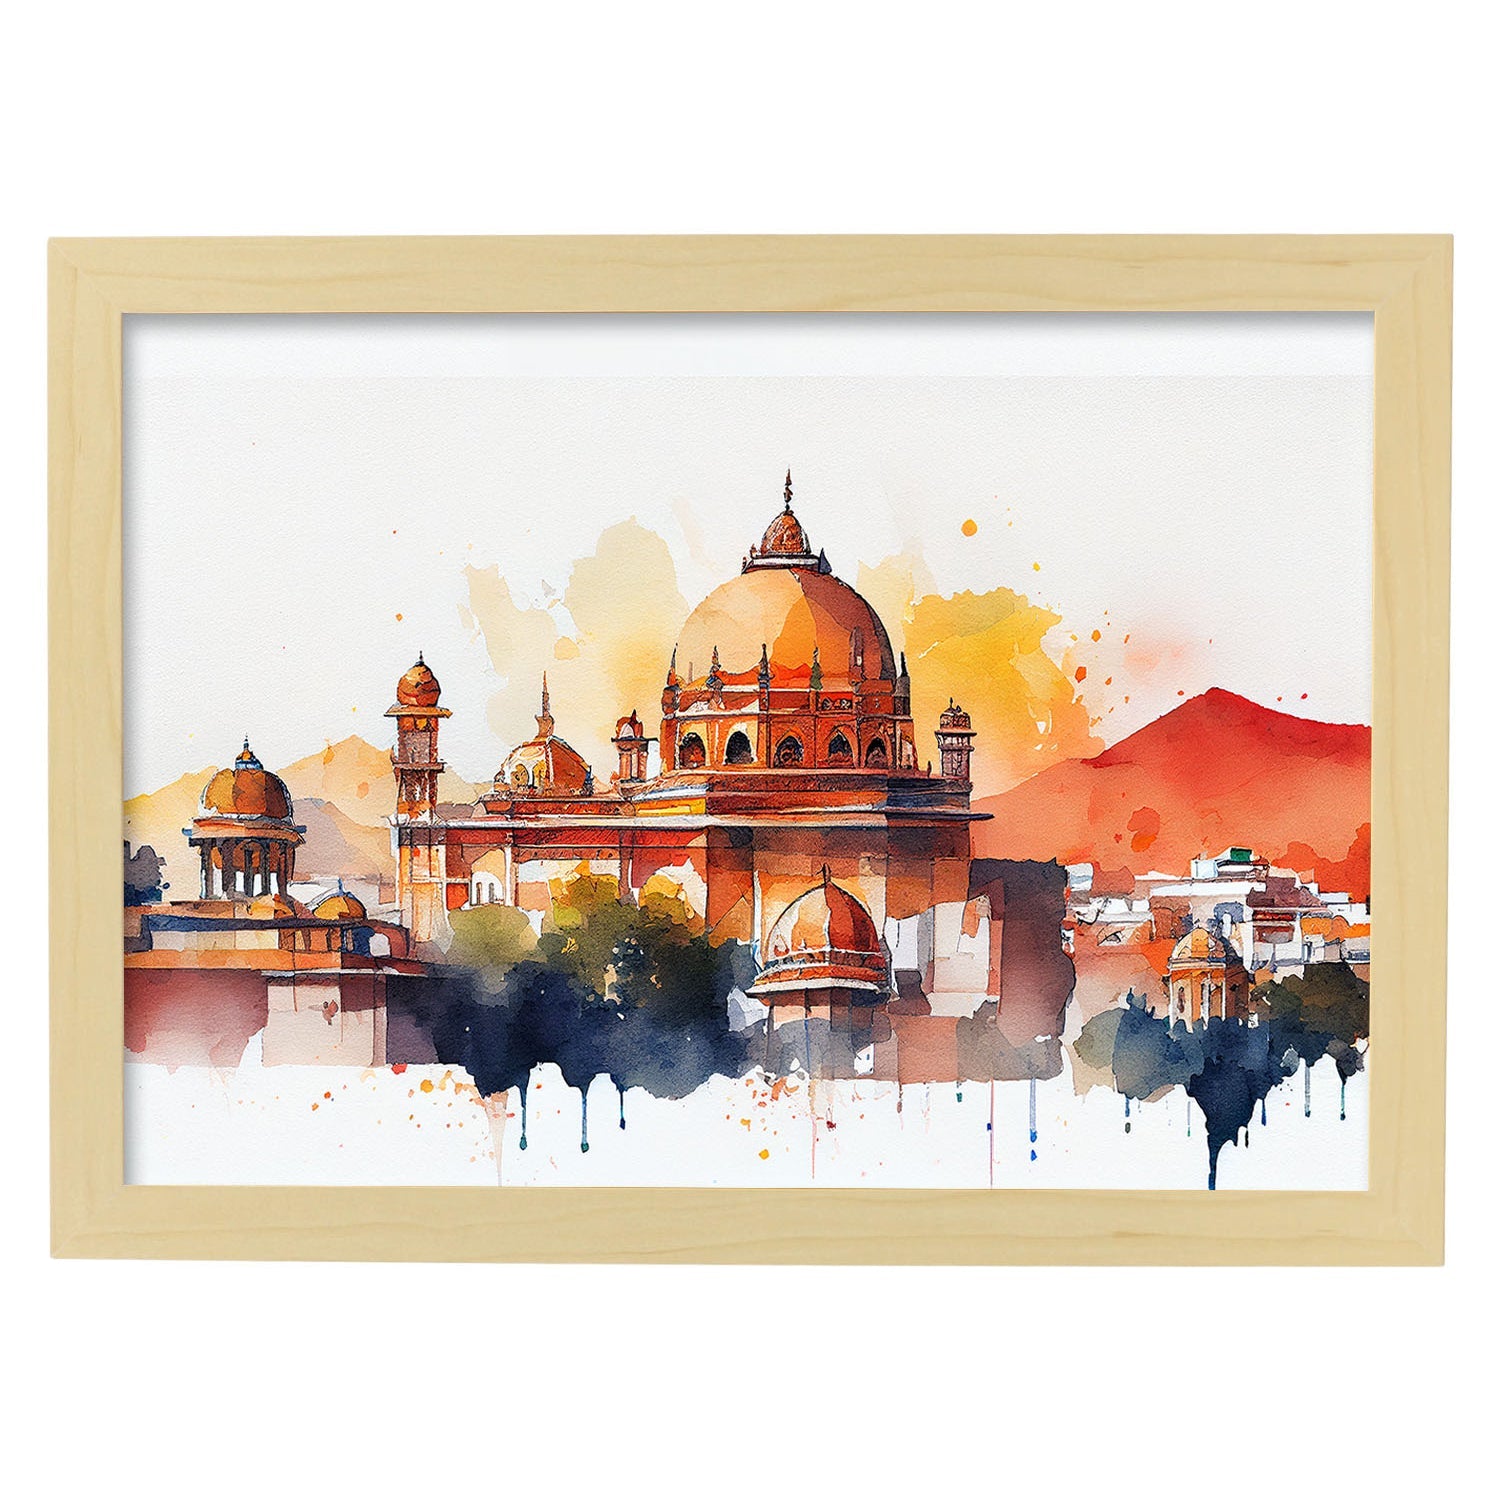 Nacnic watercolor of a skyline of the city of Jaipur. Aesthetic Wall Art Prints for Bedroom or Living Room Design.-Artwork-Nacnic-A4-Marco Madera Clara-Nacnic Estudio SL